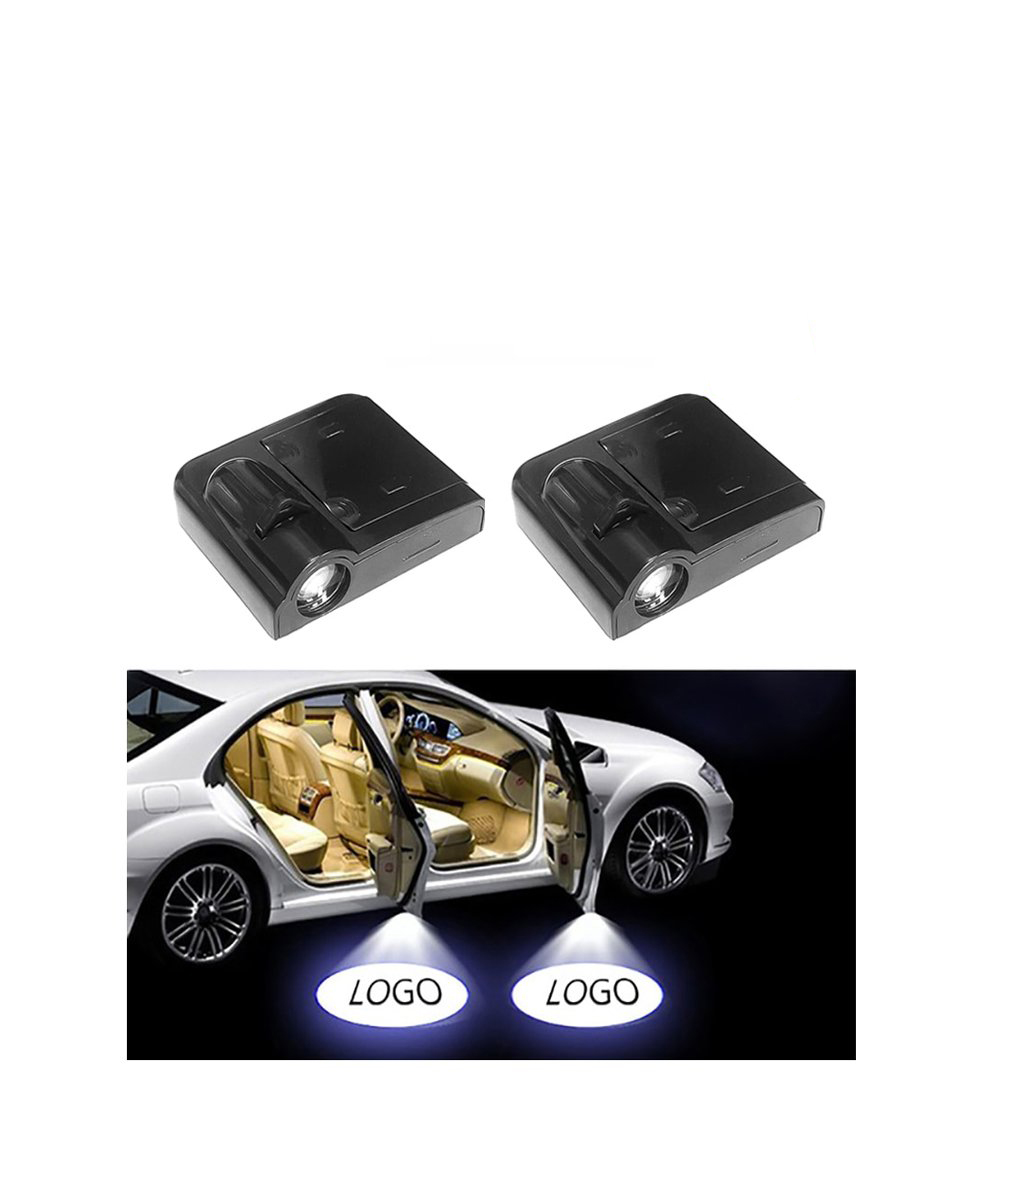 Pack of 4 LED Projector Door Shadow Welcome Light Ghost Courtesy Logo Emblem Lamps Kit for BMW Cars YSHUAI Wireless Welcome Projector Lights Universal Car Door Projector Color : Beige 